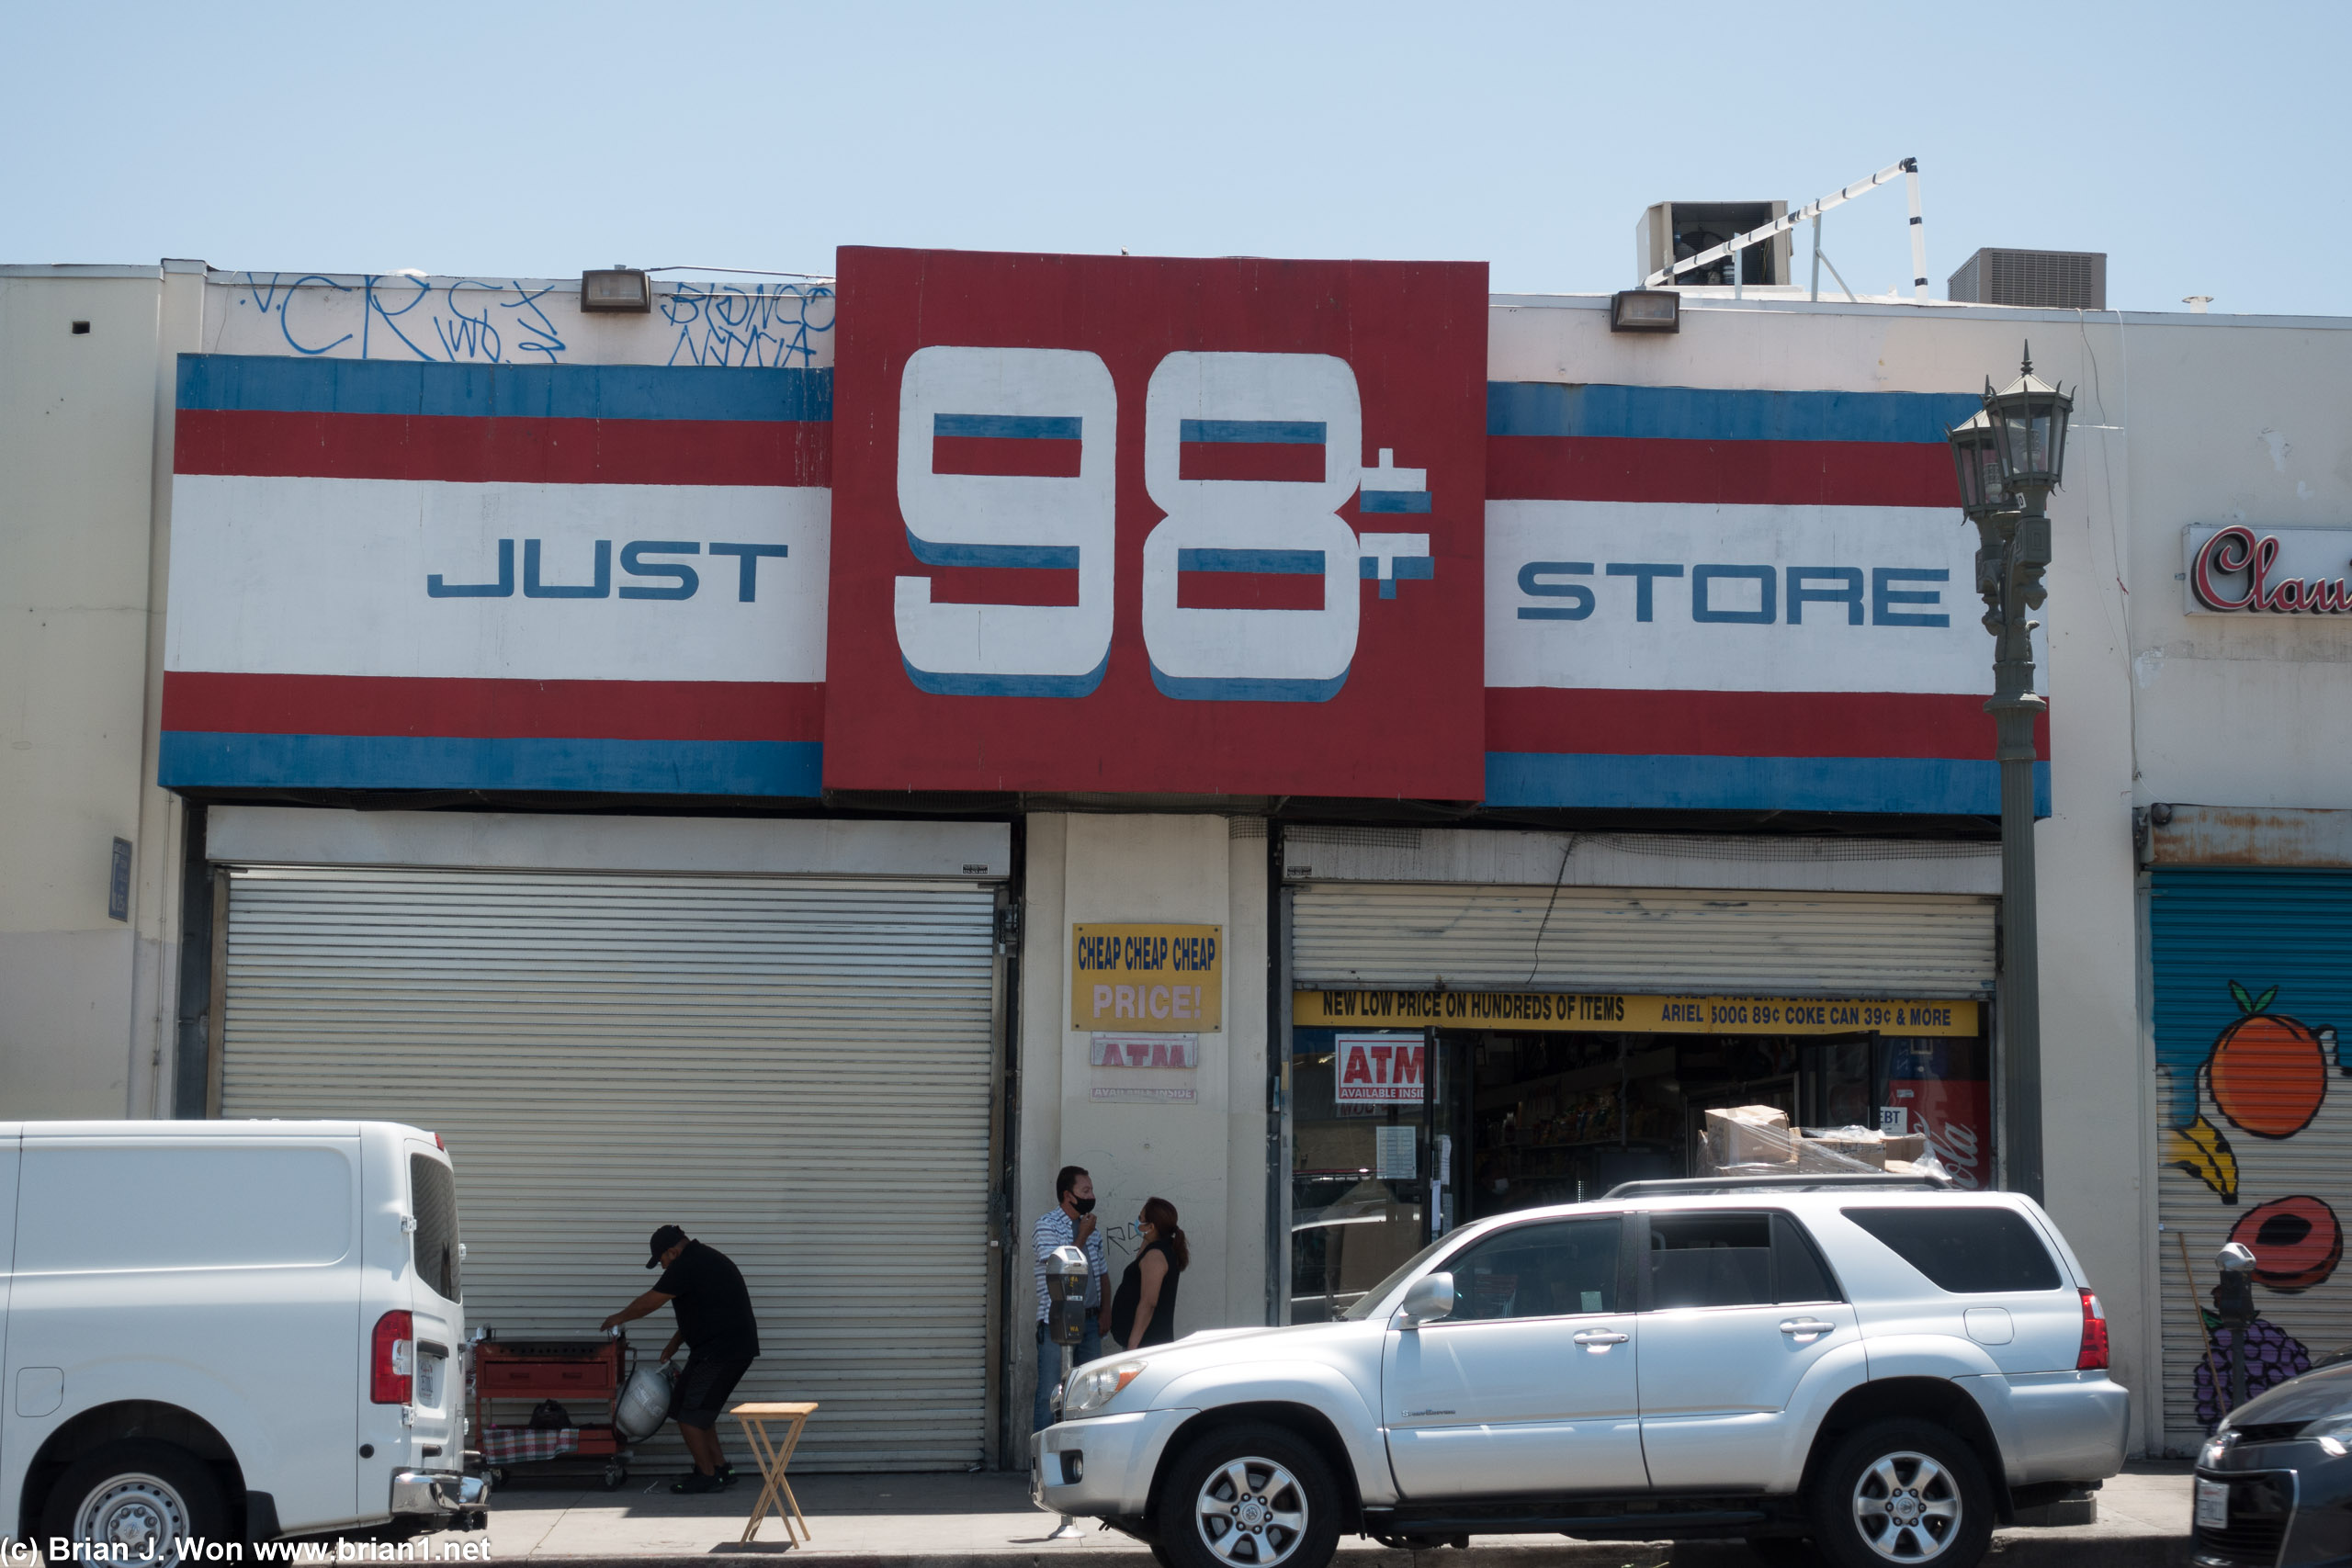 The 98 cent store.